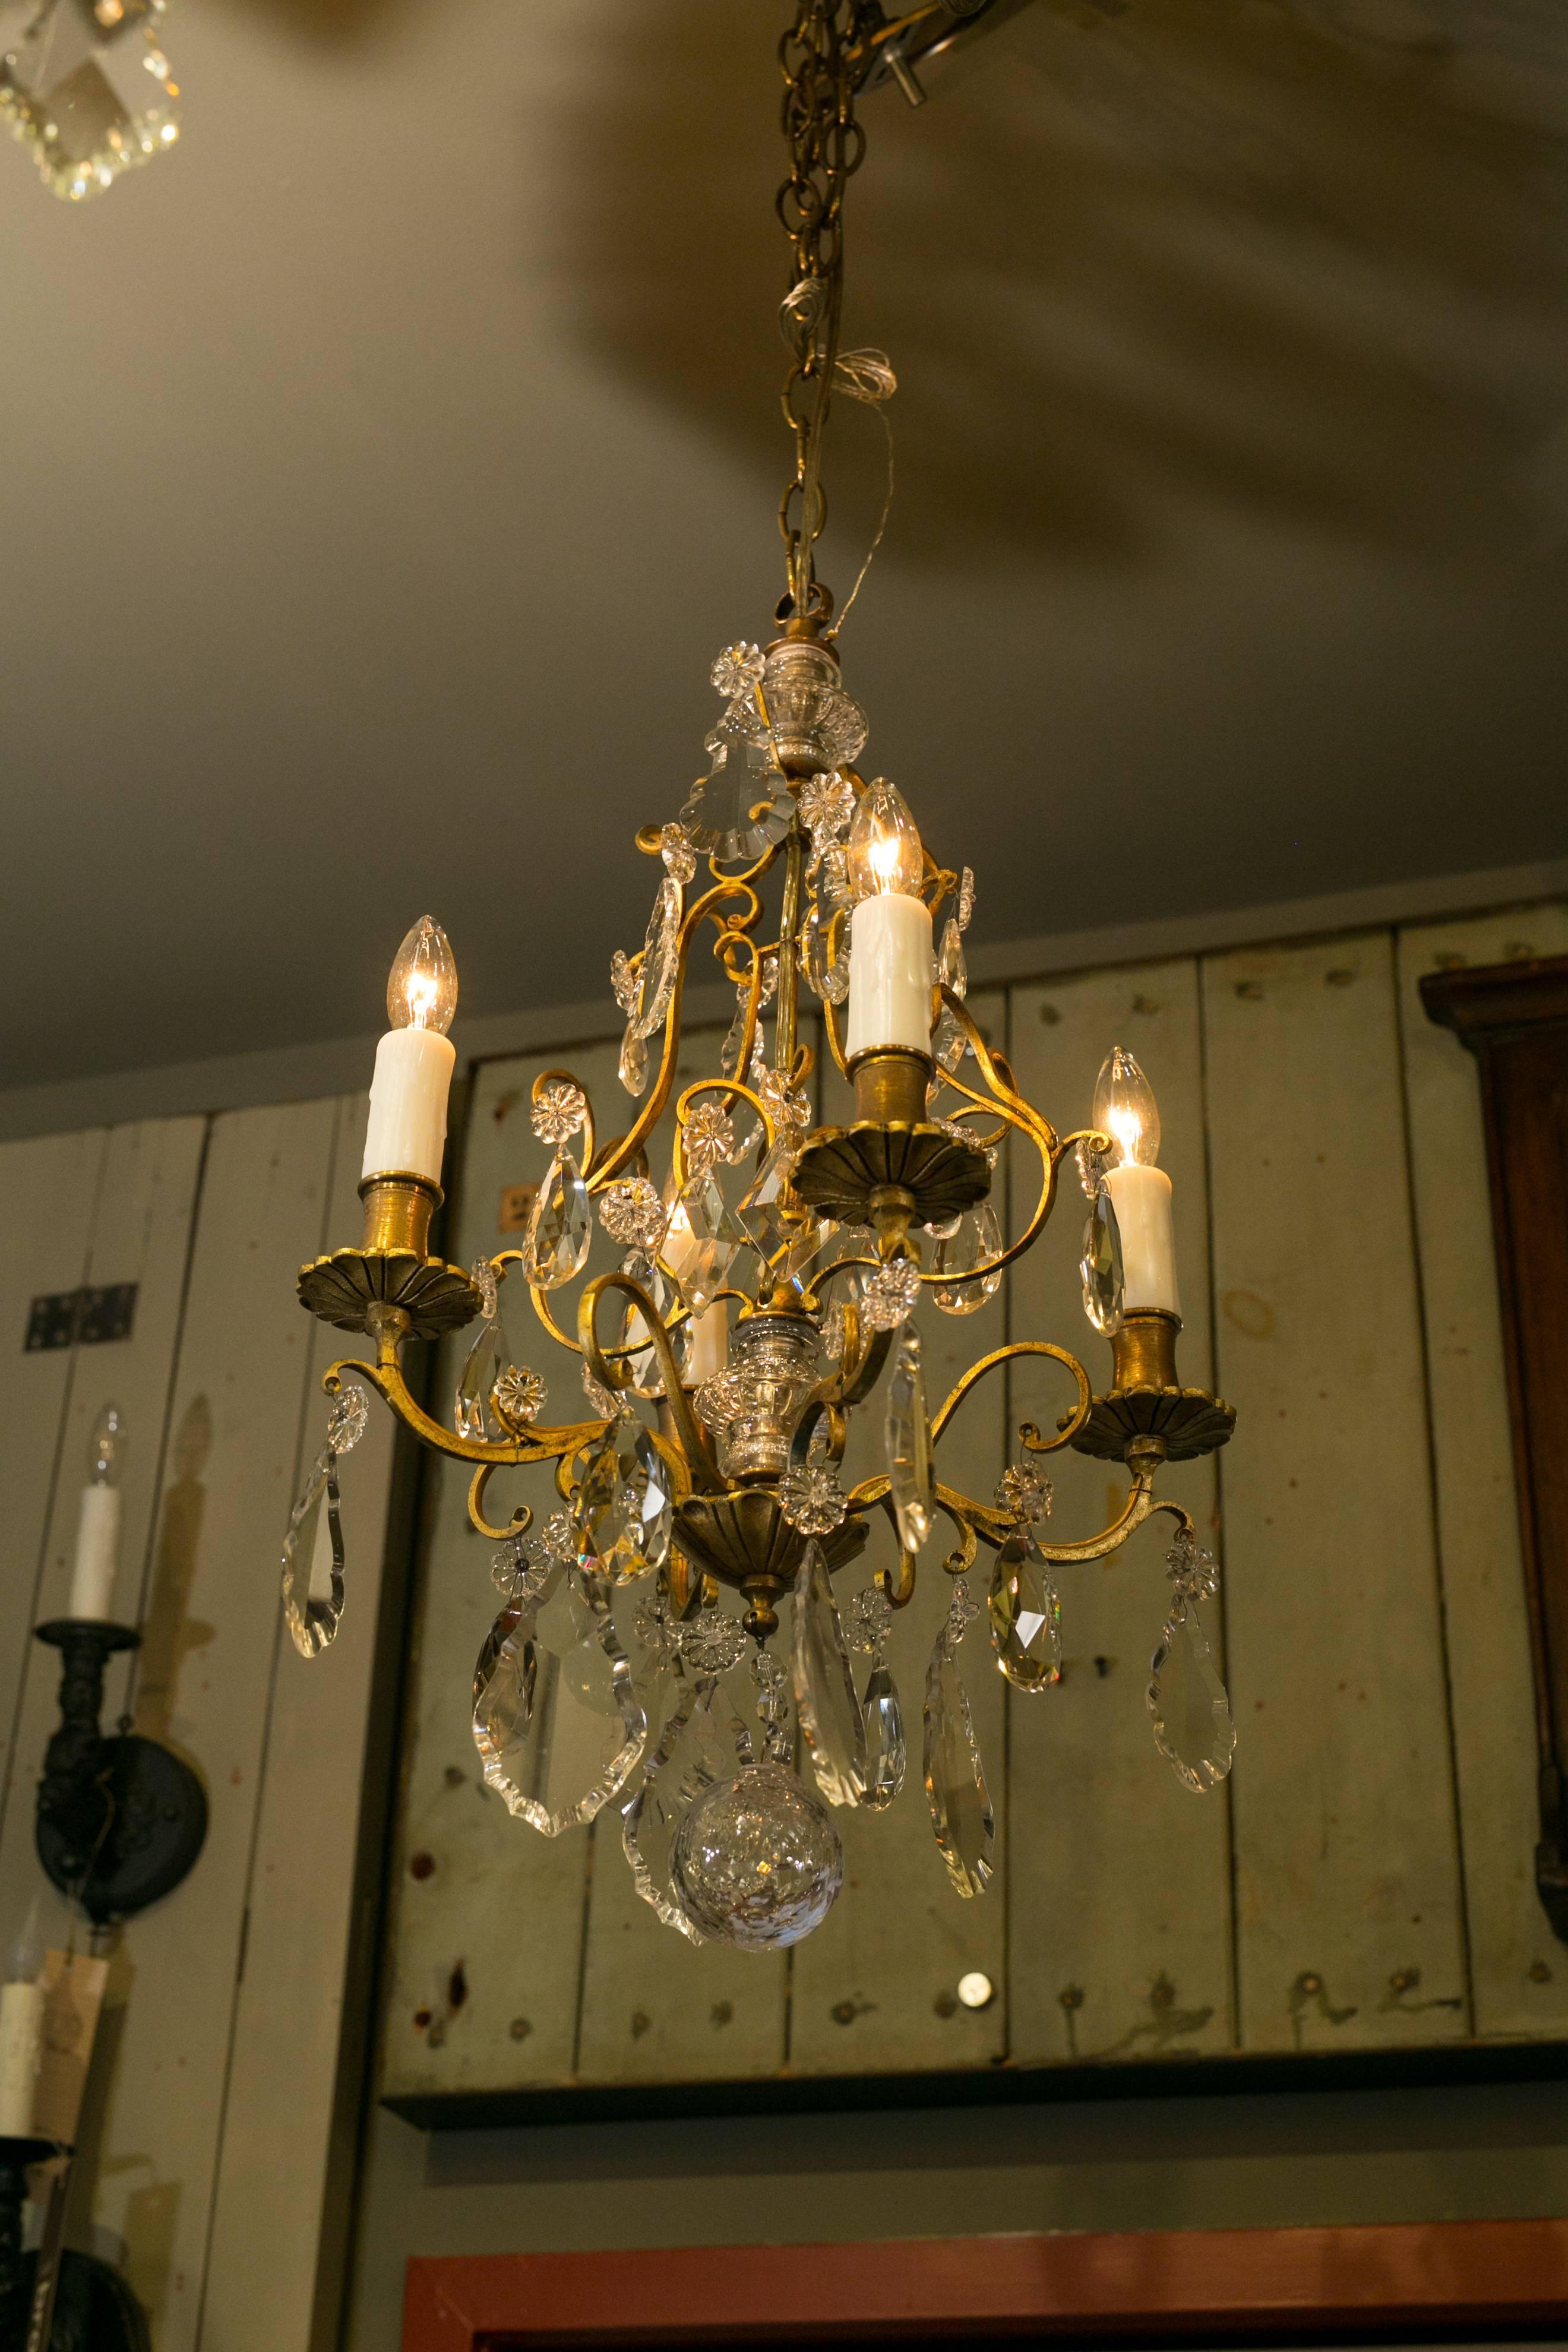 Charming petite brass and crystal chandelier from France, circa 1900. Beautiful floral shaped bobeche and scrolling frame. Inner brass cage of the light has a lyre shape design perfect for a music room. Faceted ball drop at the base. Newly rewired